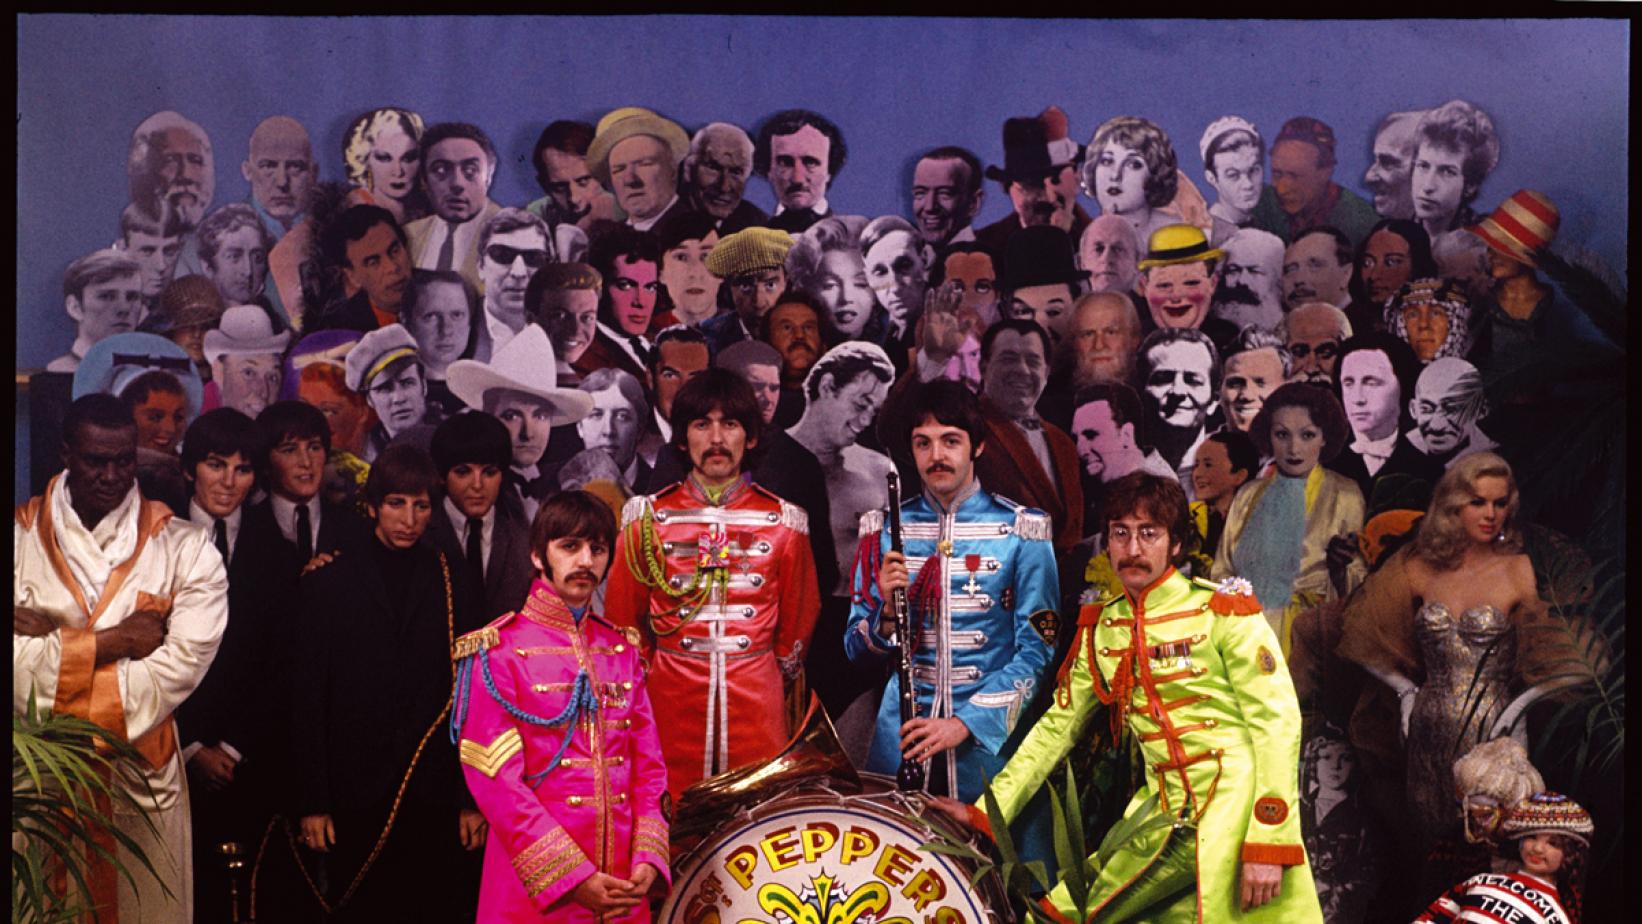 Beatles sgt peppers lonely hearts club. Битлз сержант Пеппер. Sgt. Pepper's Lonely Hearts Club Band Битлз. Сержант Пеппер 1967. The Beatles Sgt Pepper оркестр 1967.